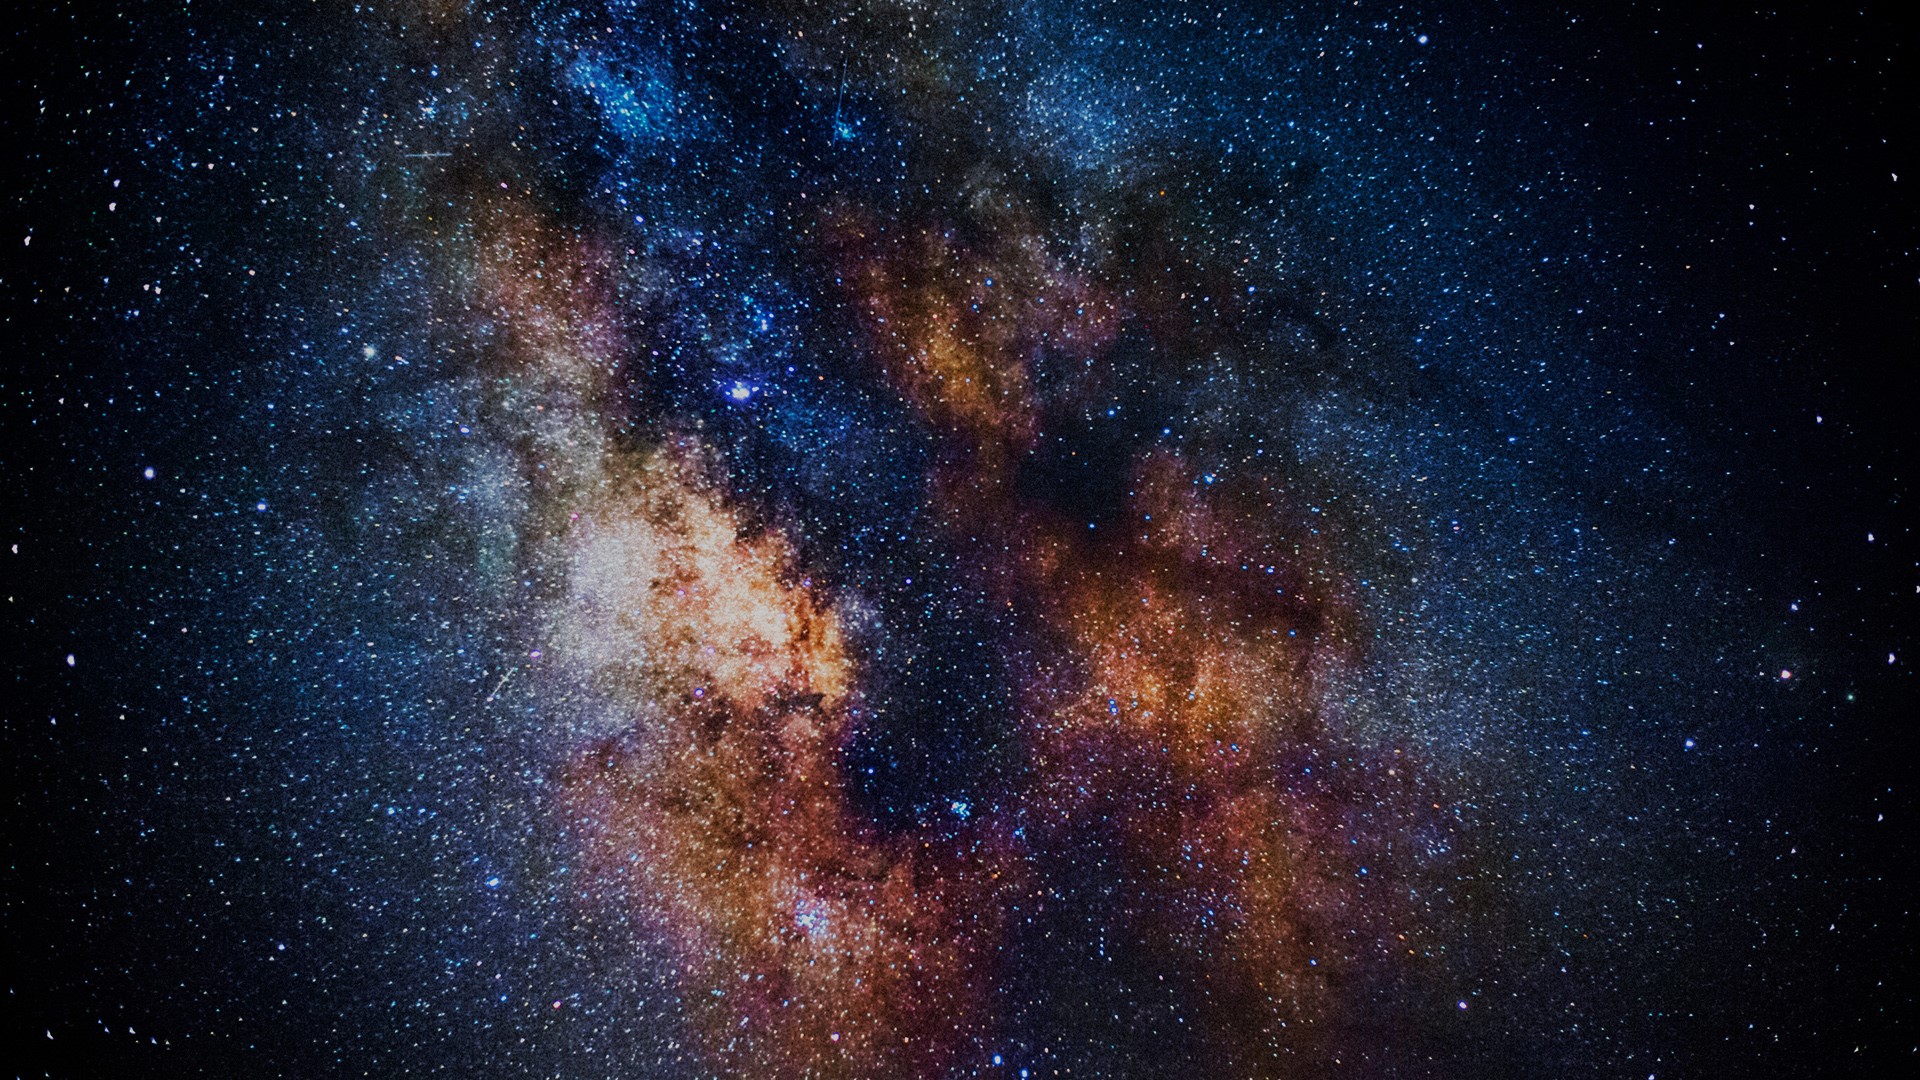 The center of the Milky Way galaxy | Windows 10 Spotlight Images